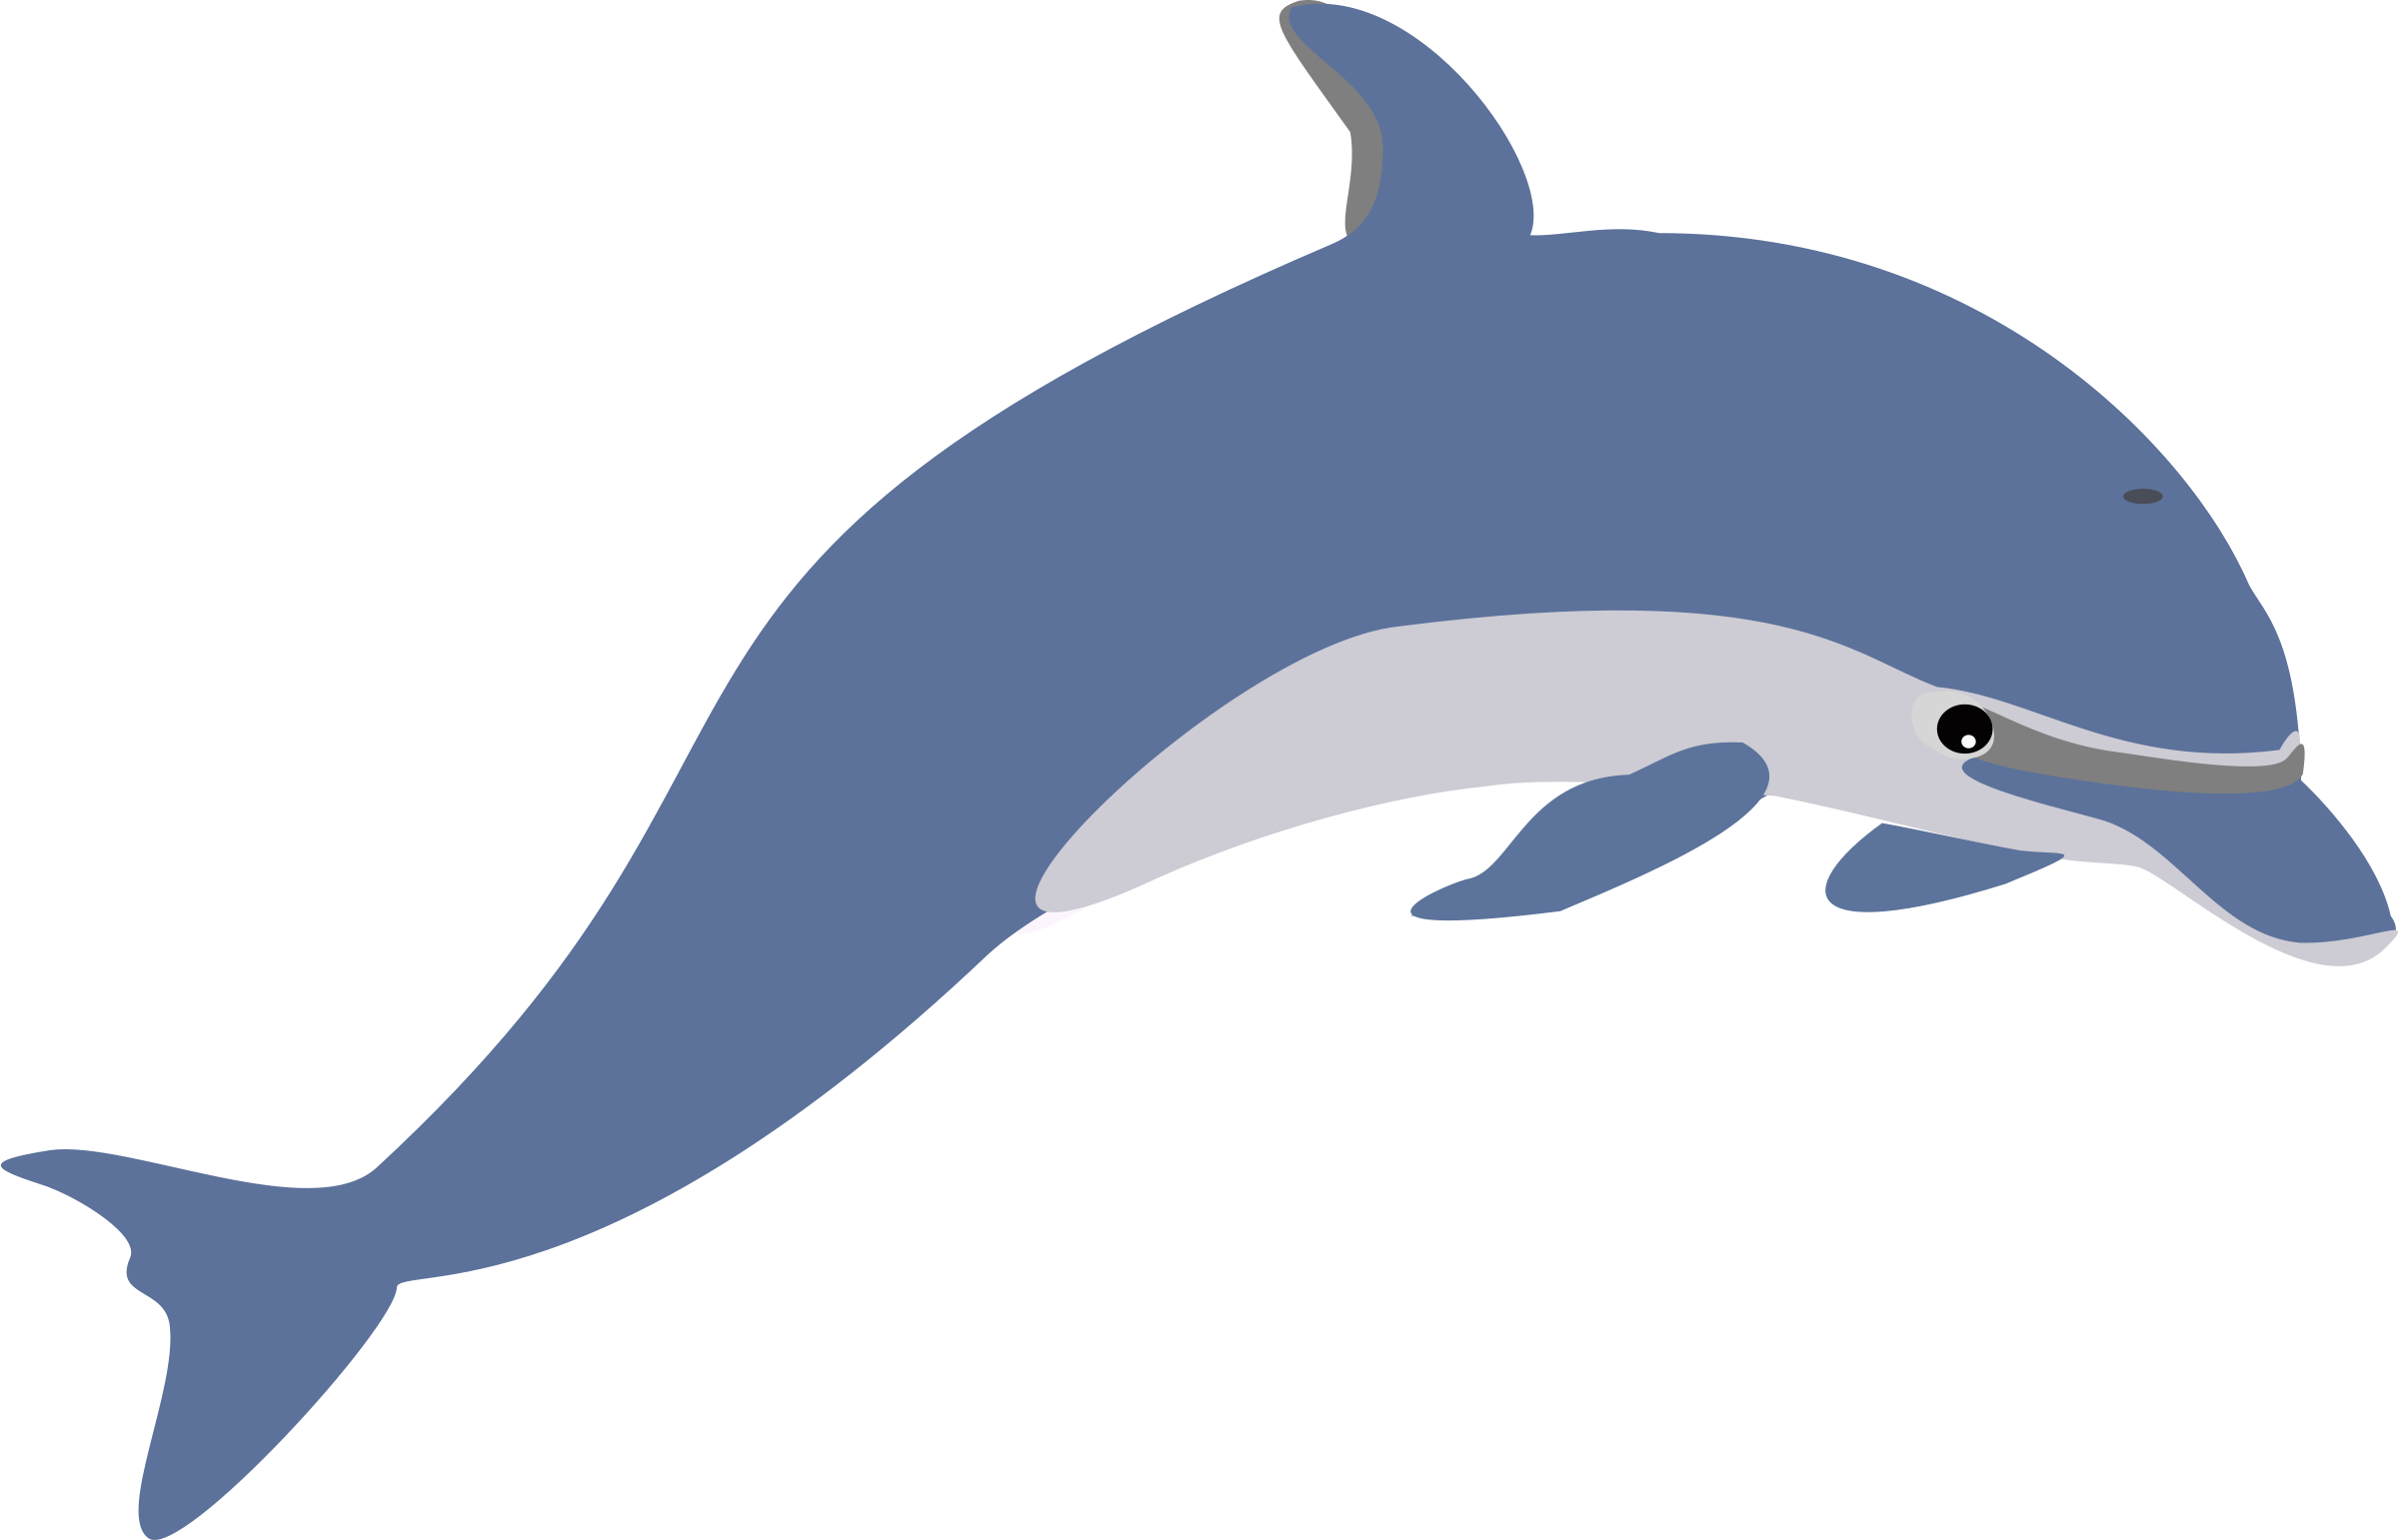 Dolphin Clipart | Clipart Panda - Free Clipart Images